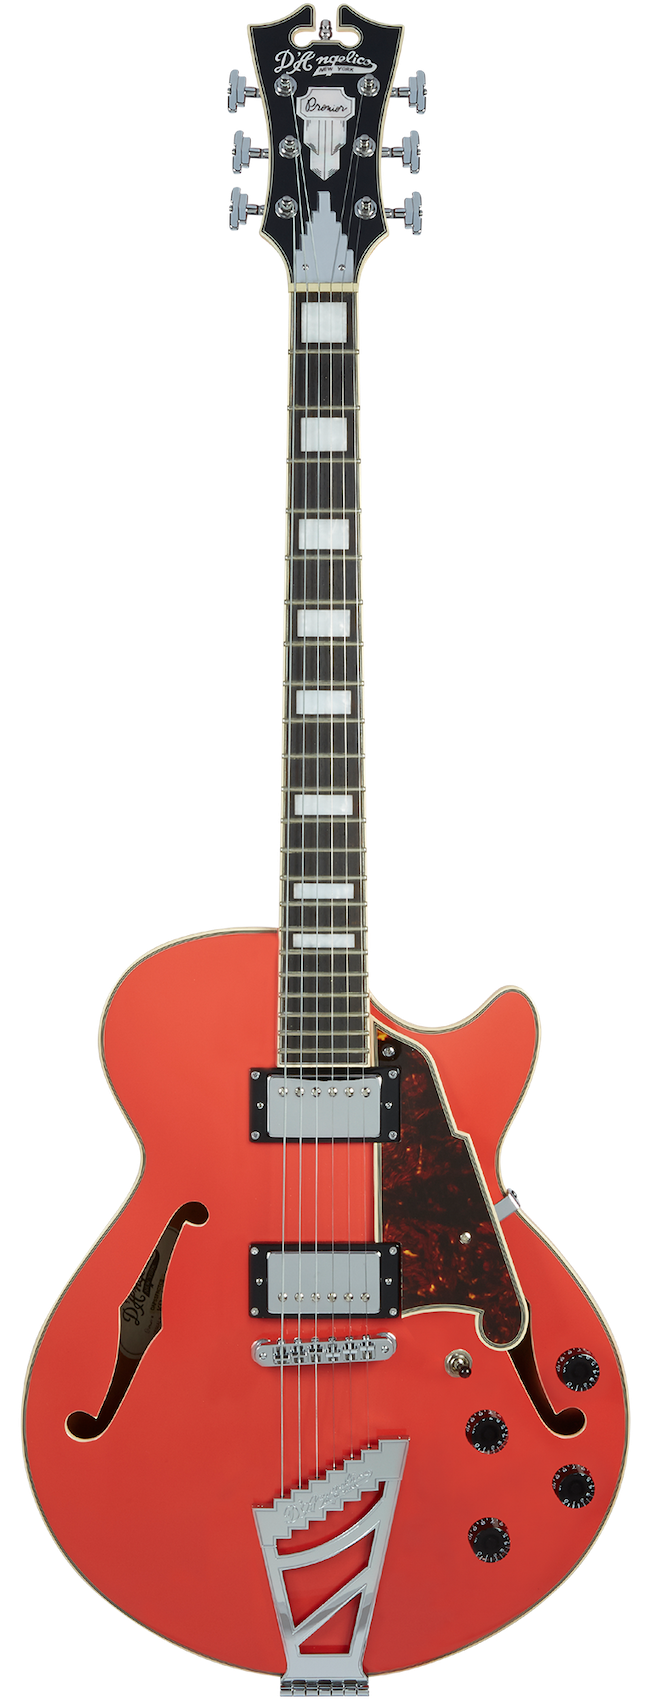 D'Angelico Premier SS w/Stairstep Tailpiece - Fiesta Red